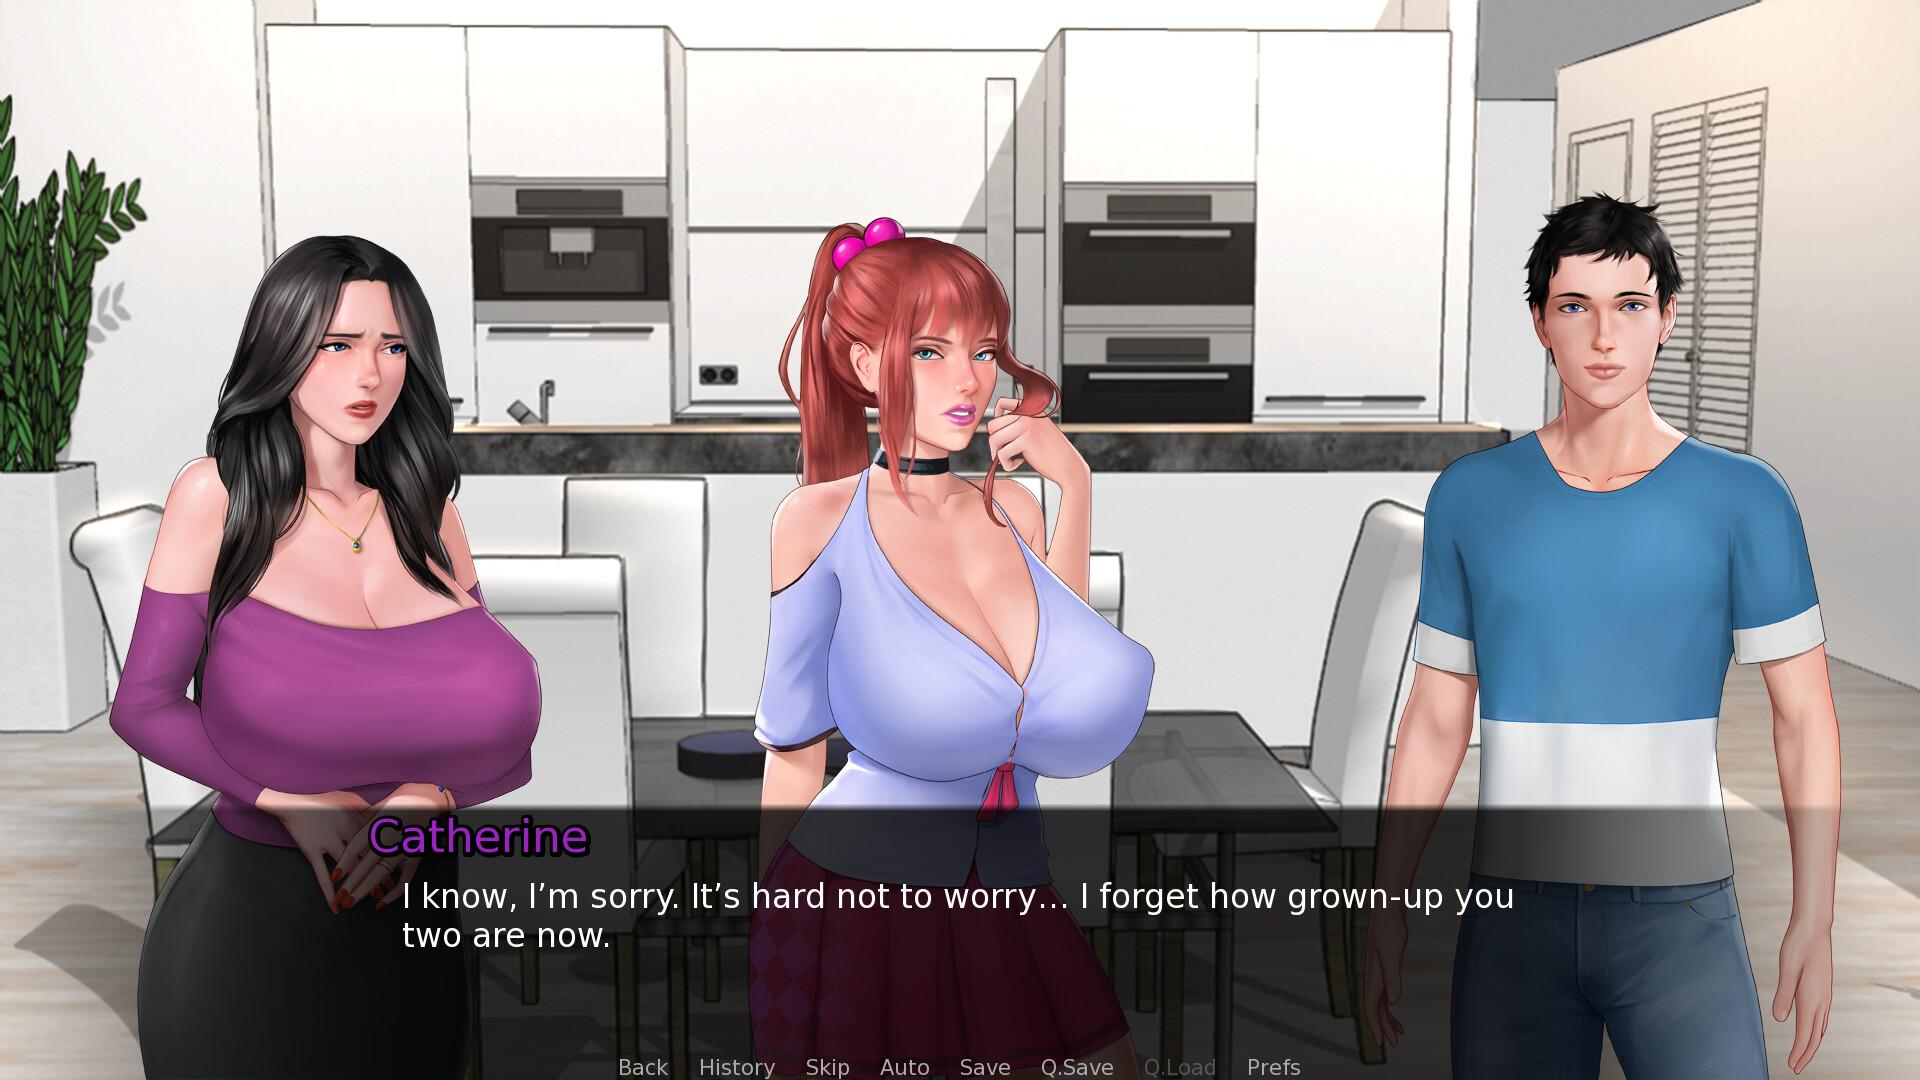 Screenshot №2 from game Prince of Suburbia - Part 1